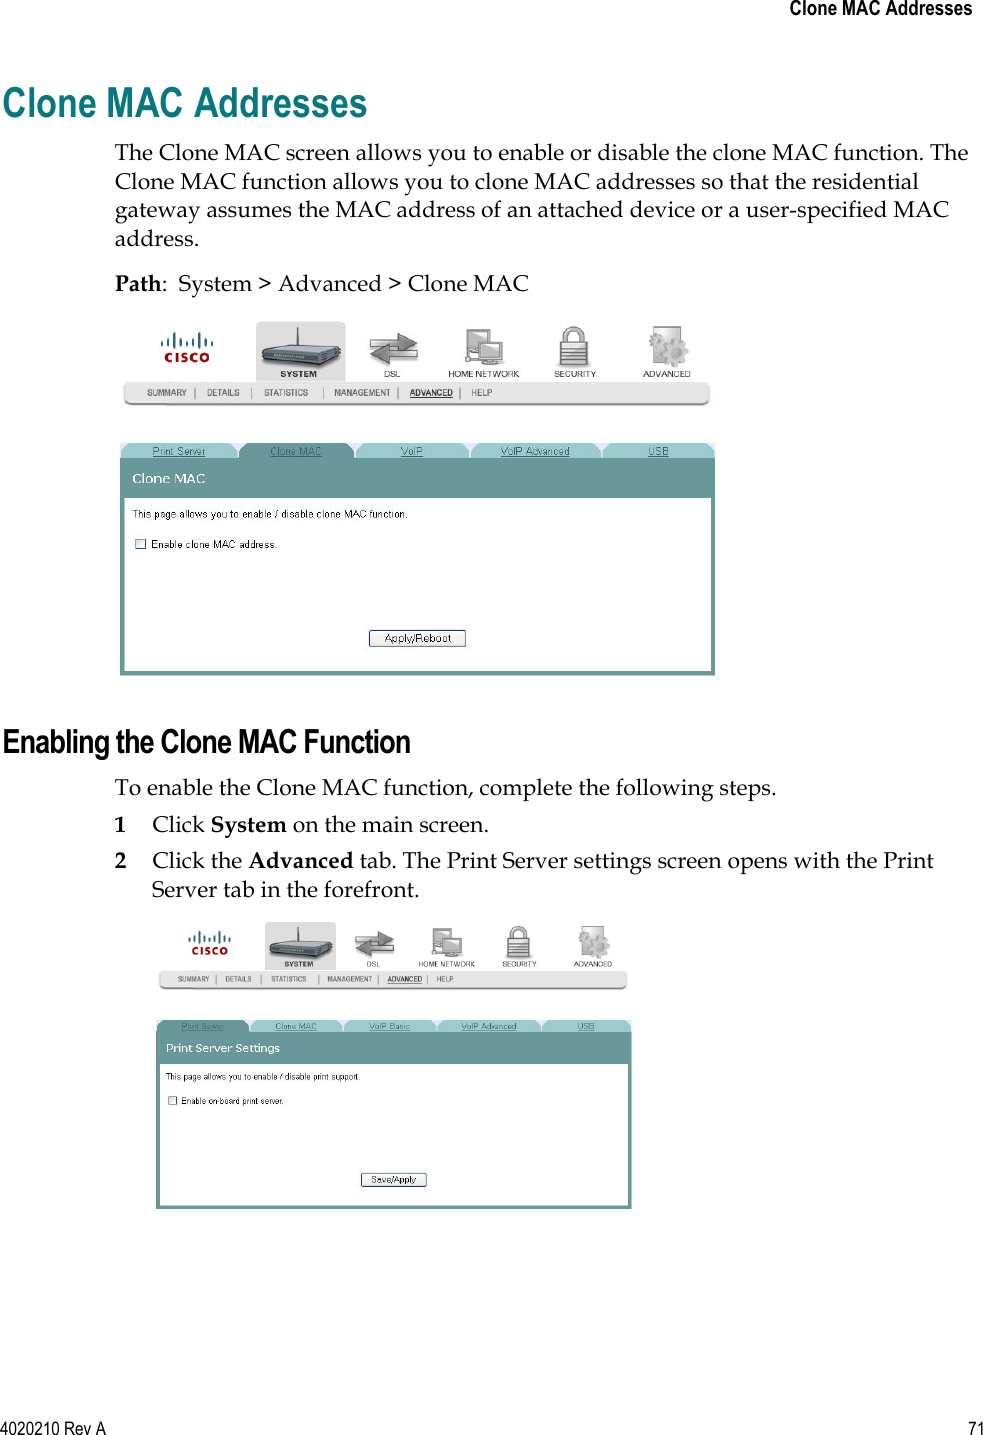   Clone MAC Addresses 4020210 Rev A 71  Clone MAC Addresses The Clone MAC screen allows you to enable or disable the clone MAC function. The Clone MAC function allows you to clone MAC addresses so that the residential gateway assumes the MAC address of an attached device or a user-specified MAC address. Path:  System &gt; Advanced &gt; Clone MAC   Enabling the Clone MAC Function To enable the Clone MAC function, complete the following steps. 1 Click System on the main screen.  2 Click the Advanced tab. The Print Server settings screen opens with the Print Server tab in the forefront.  